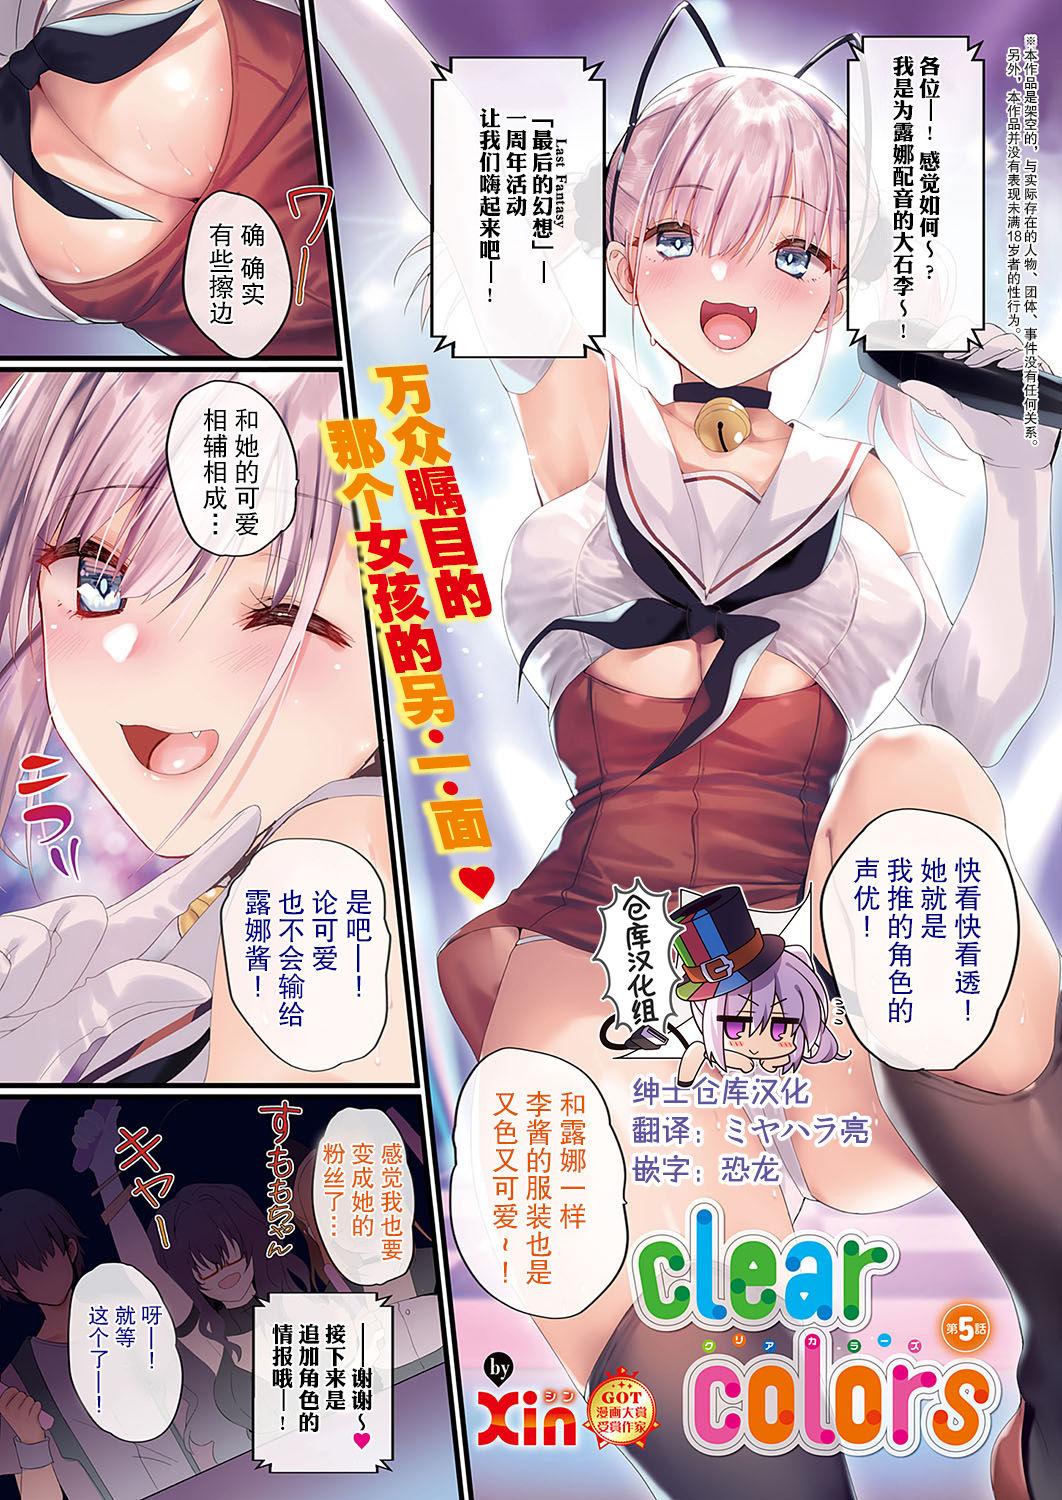 clear colors Ch. 5 0